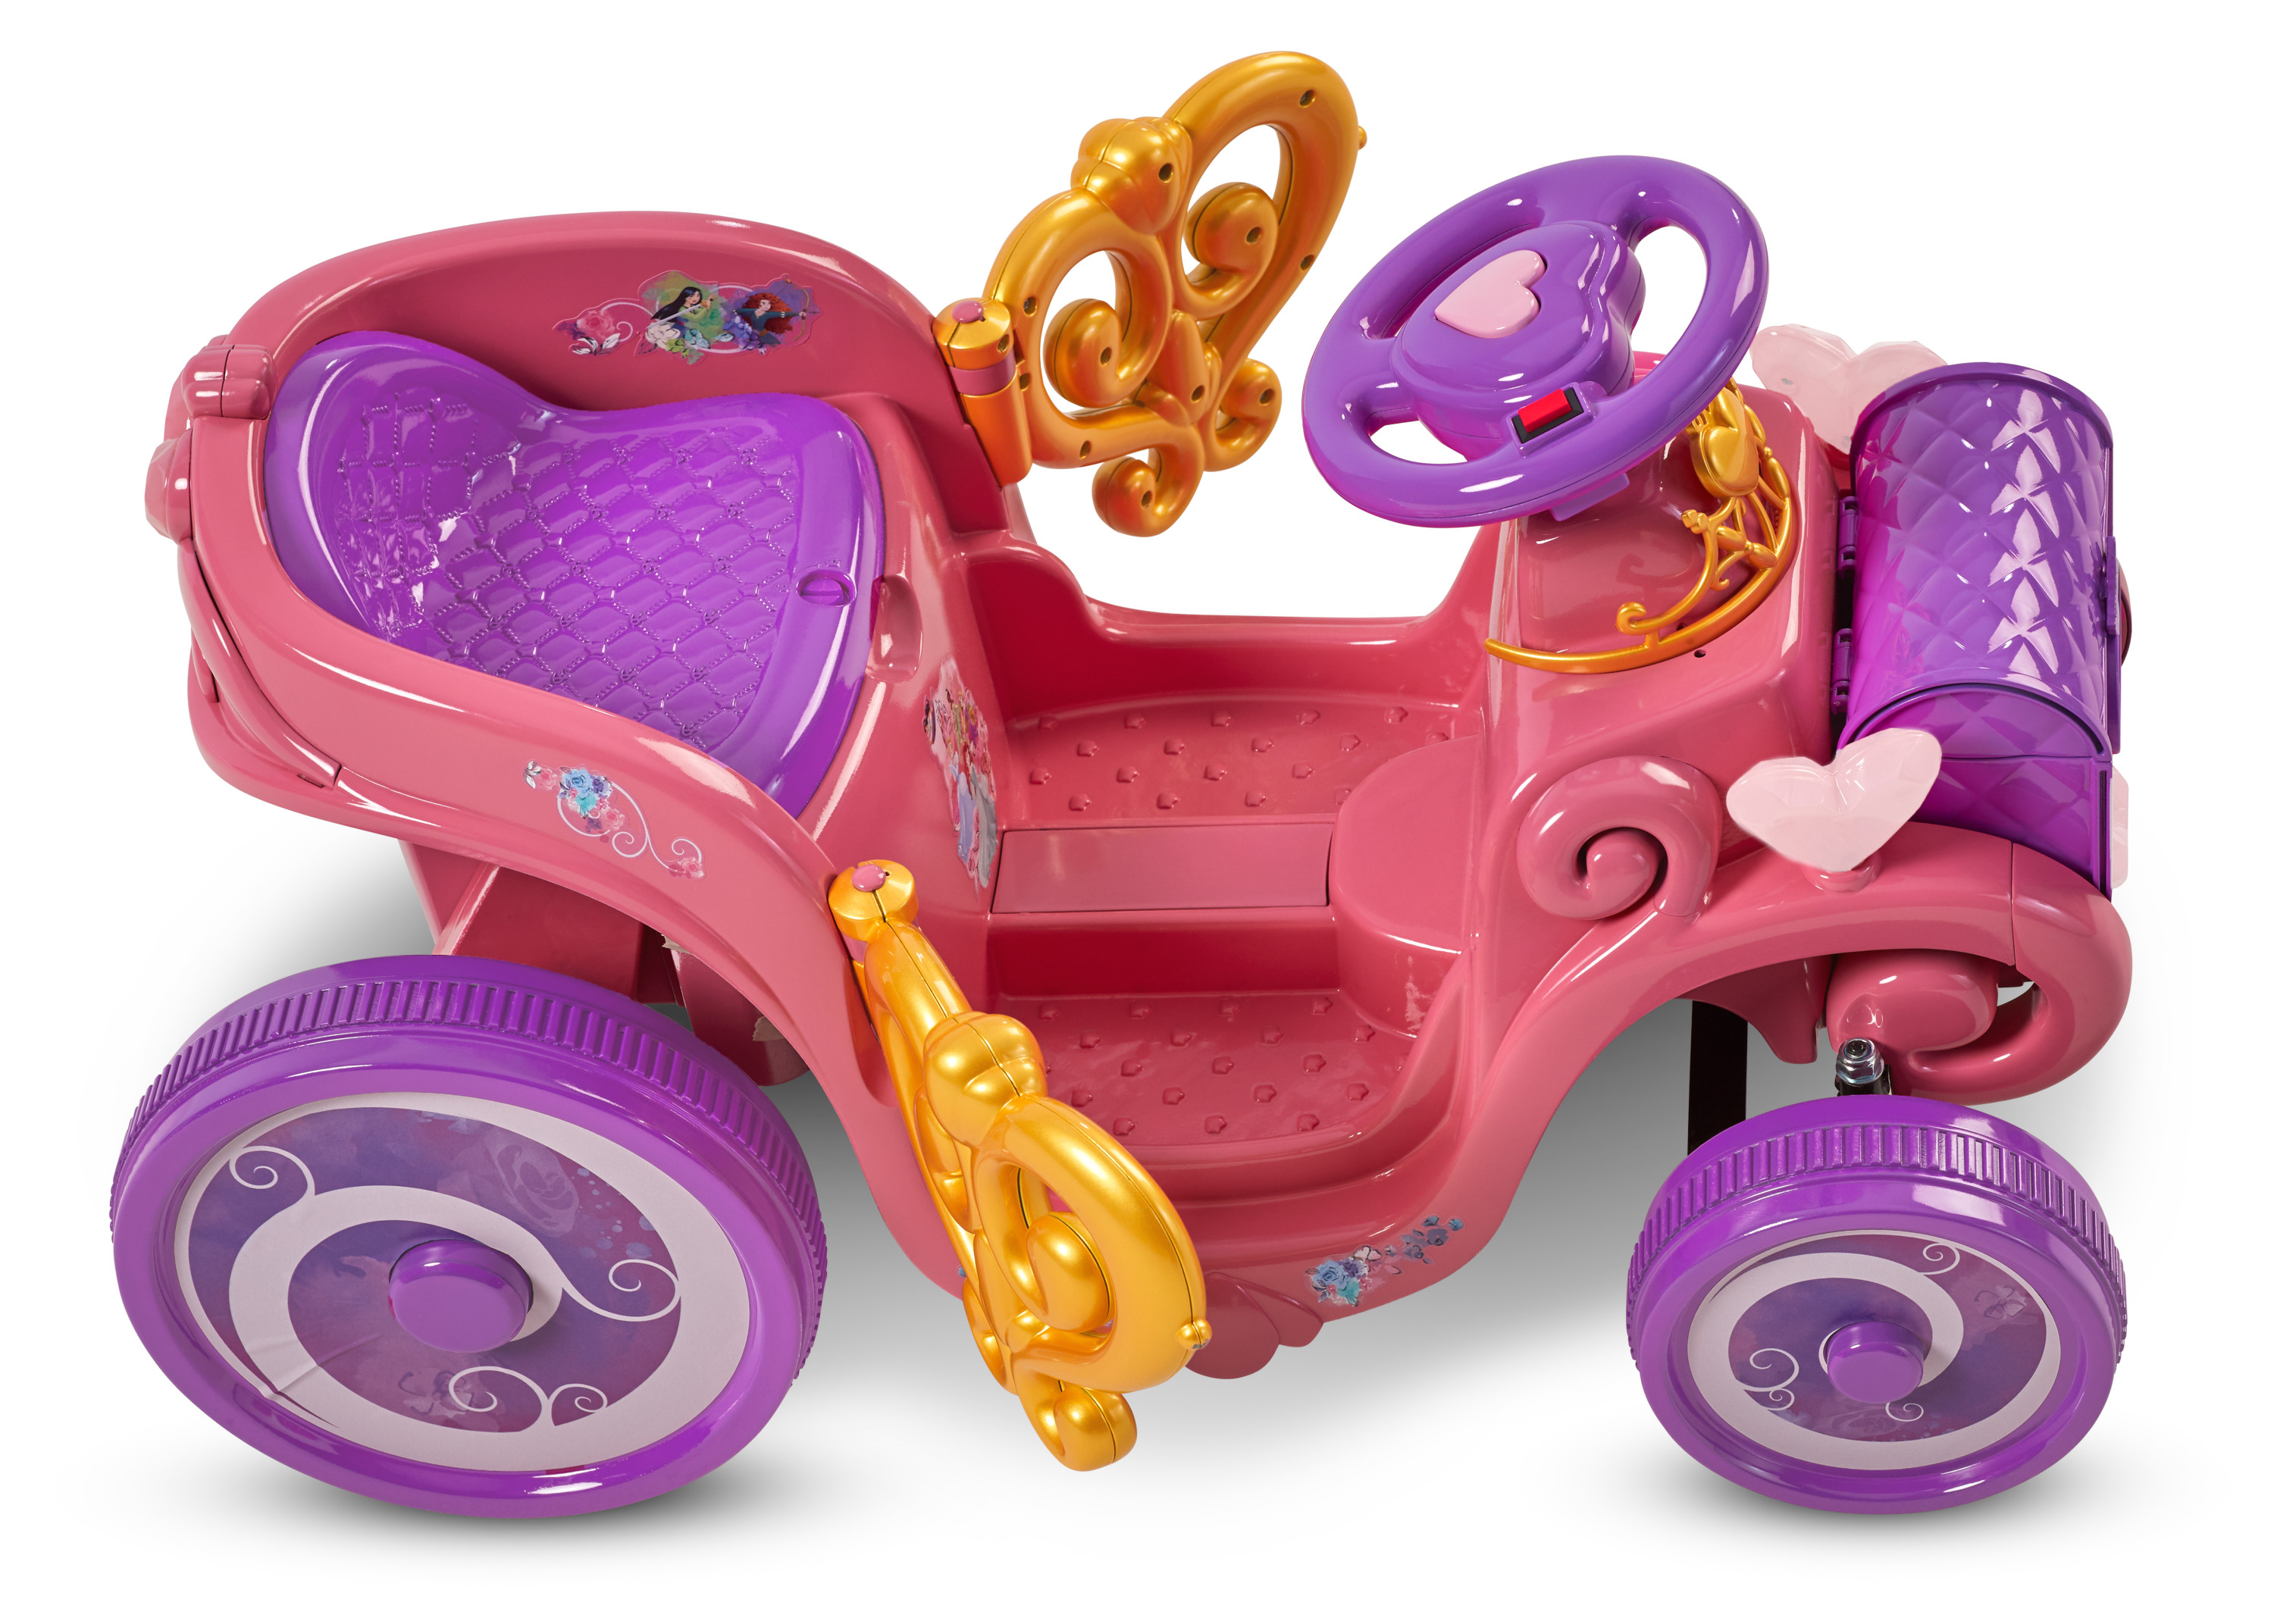 Disney Princess Enchanted Adventure Carriage Quad, 6-Volt Ride-On Toy by Kid Trax, ages 18-30 months, pink - image 3 of 8